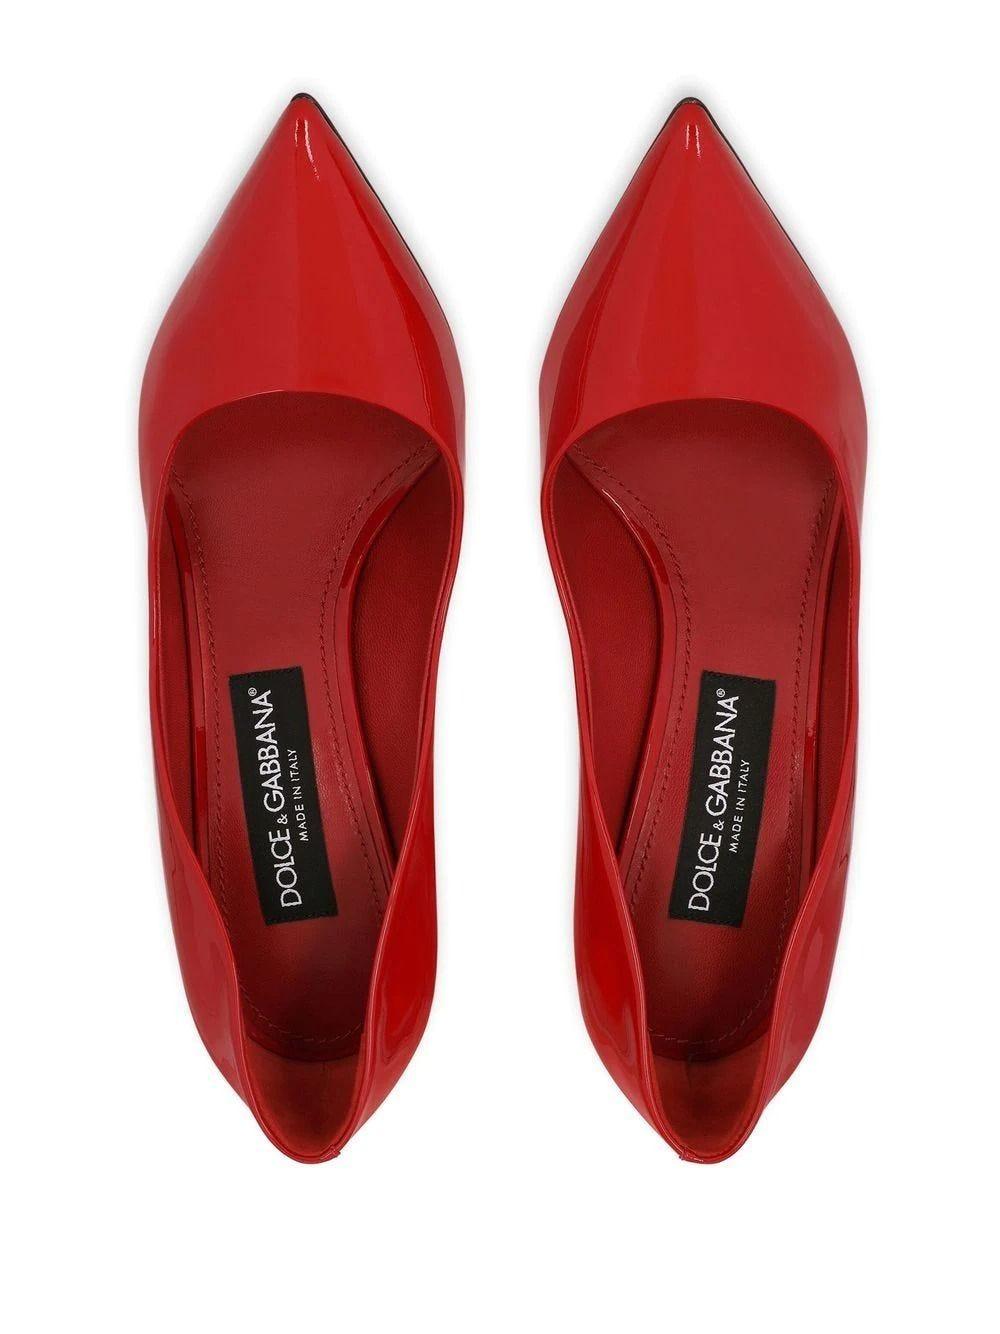 Dolce & Gabbana Patent Leather 105mm Pumps in Red | Lyst